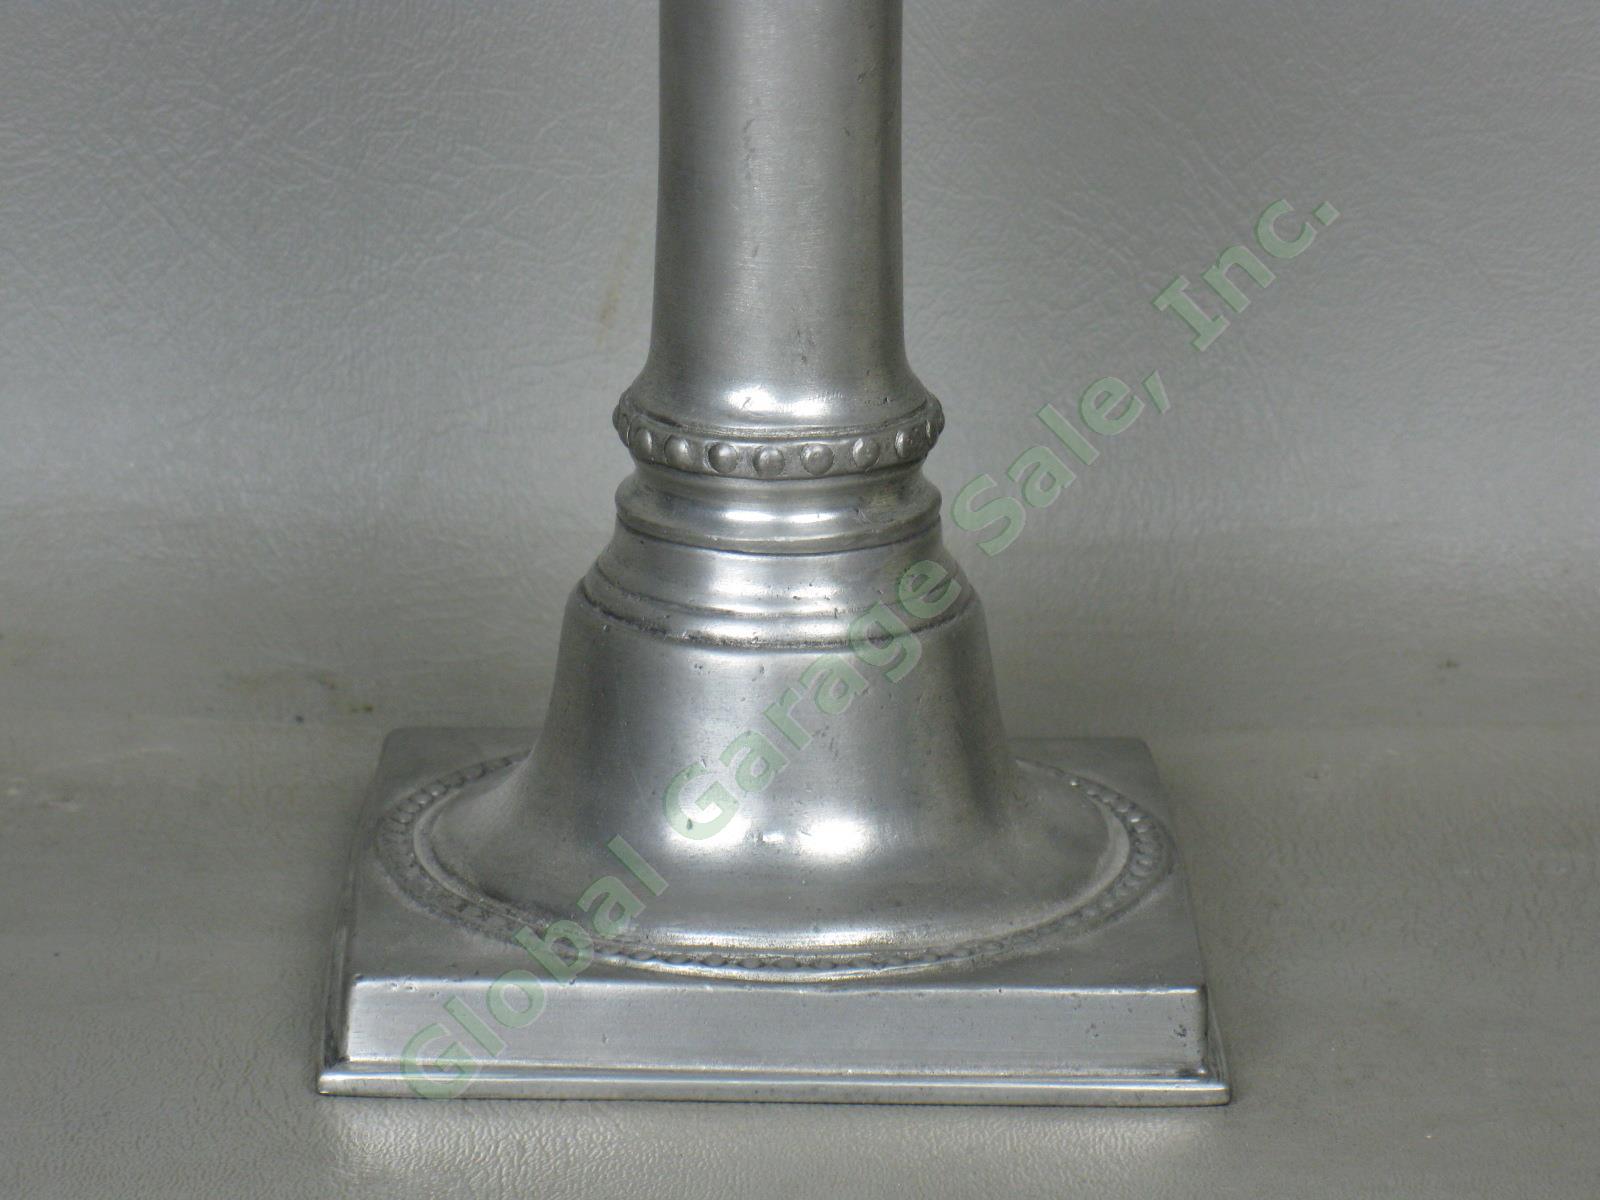 NEW Match Pewter Square Base 8" Candlestick Candle Holder Made In Italy $200 NR! 3